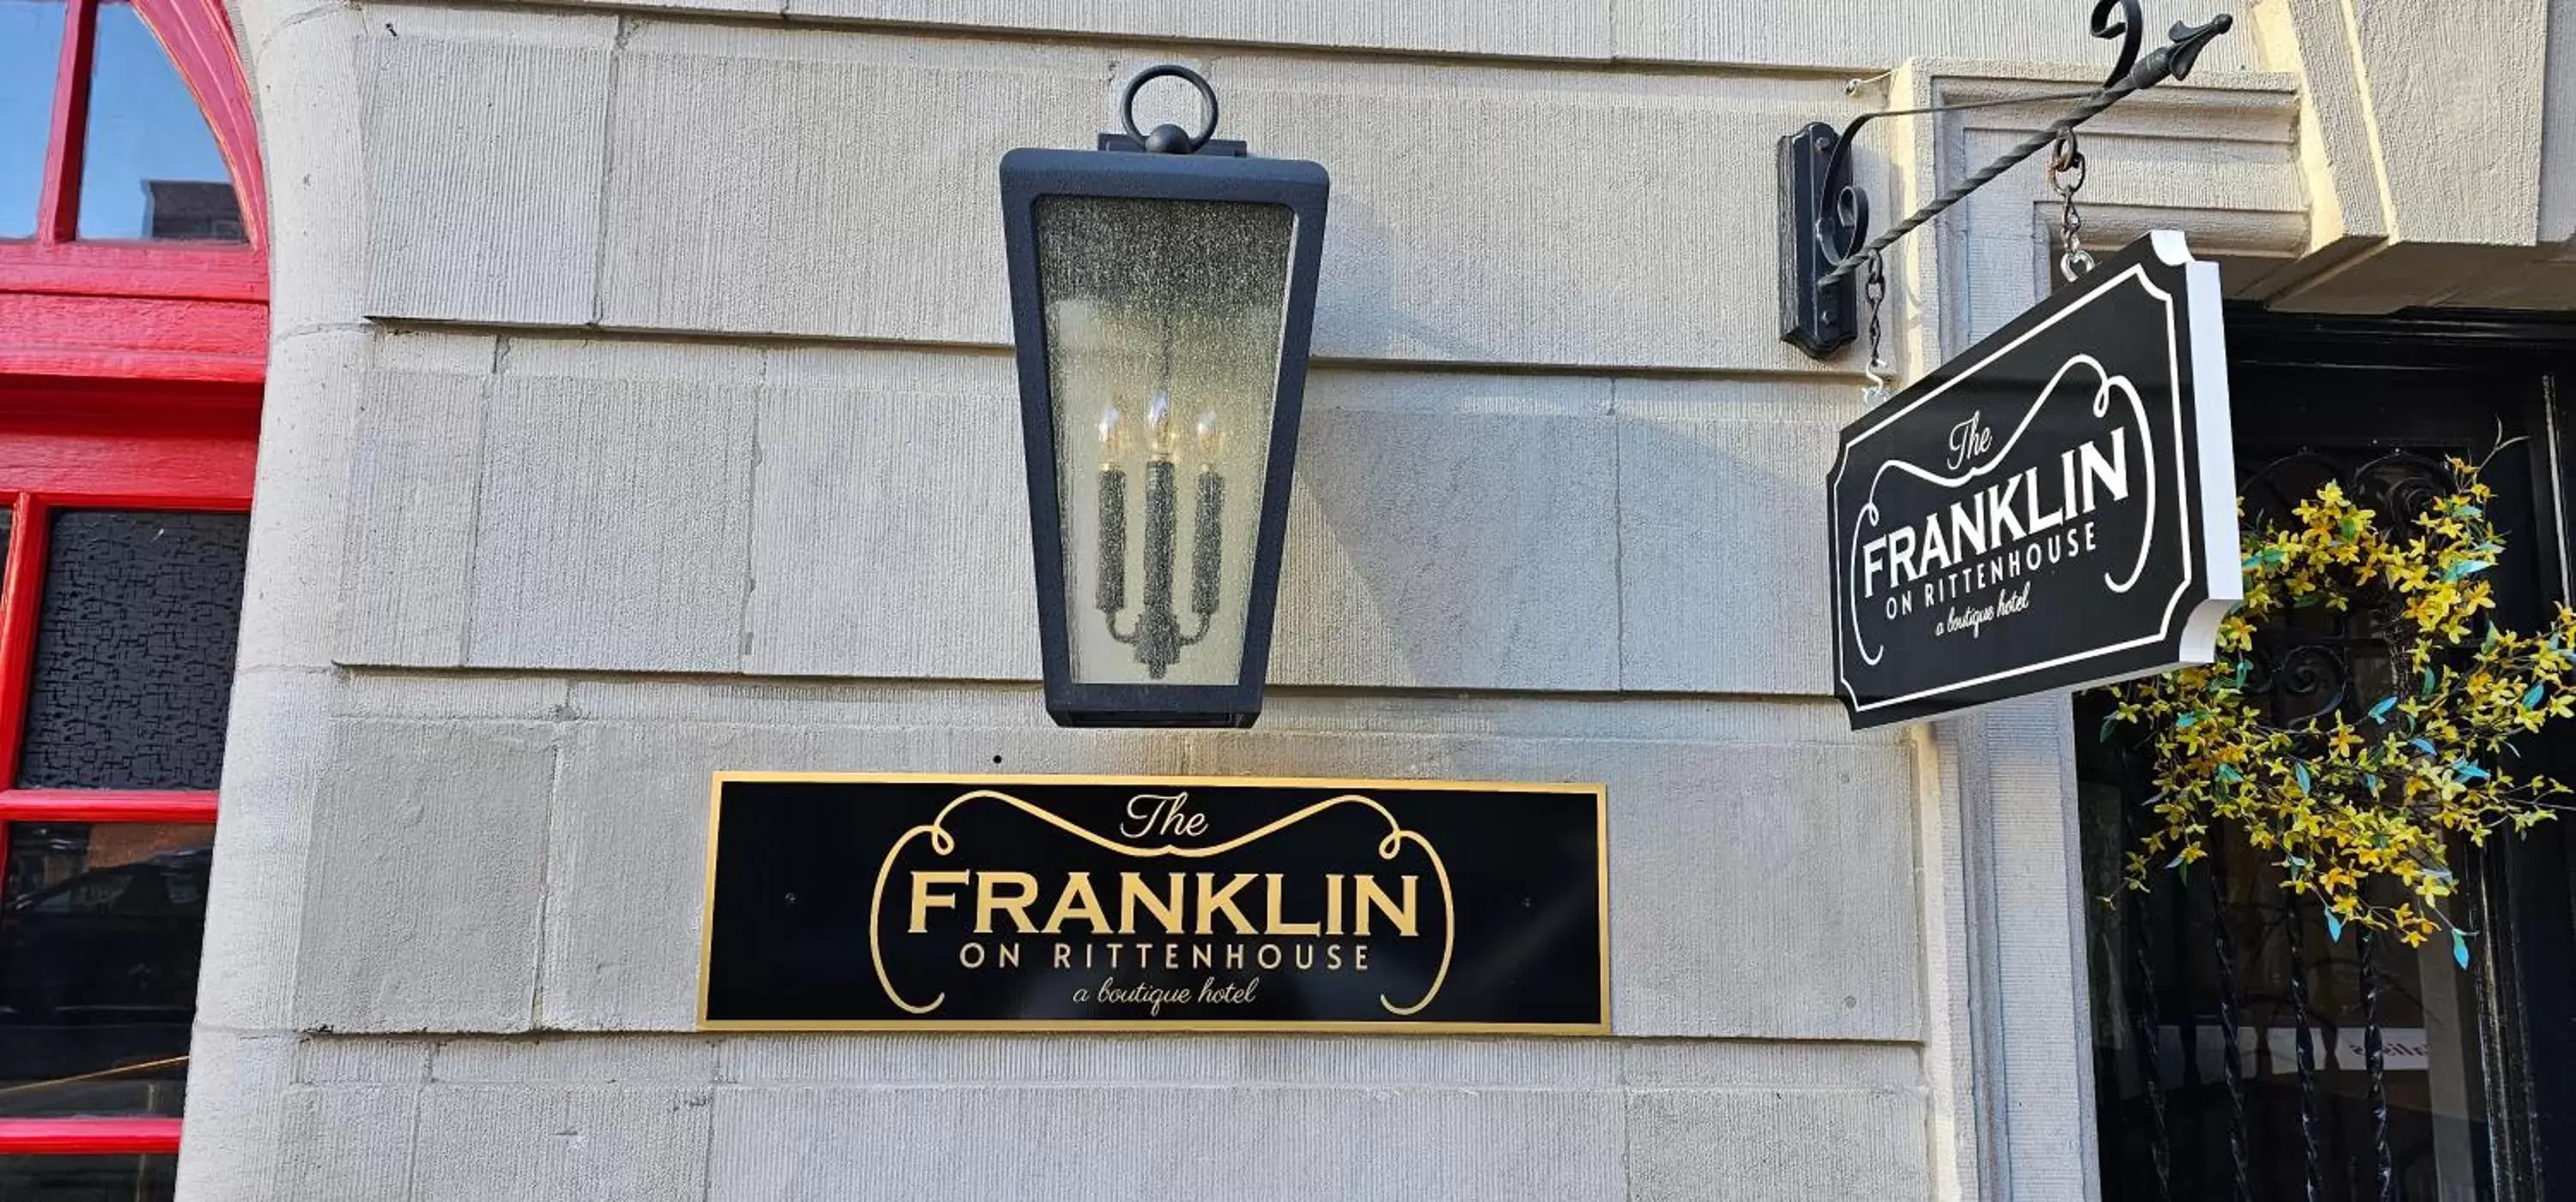 Property building, Property Logo/Sign in The Franklin on Rittenhouse, A Boutique Hotel